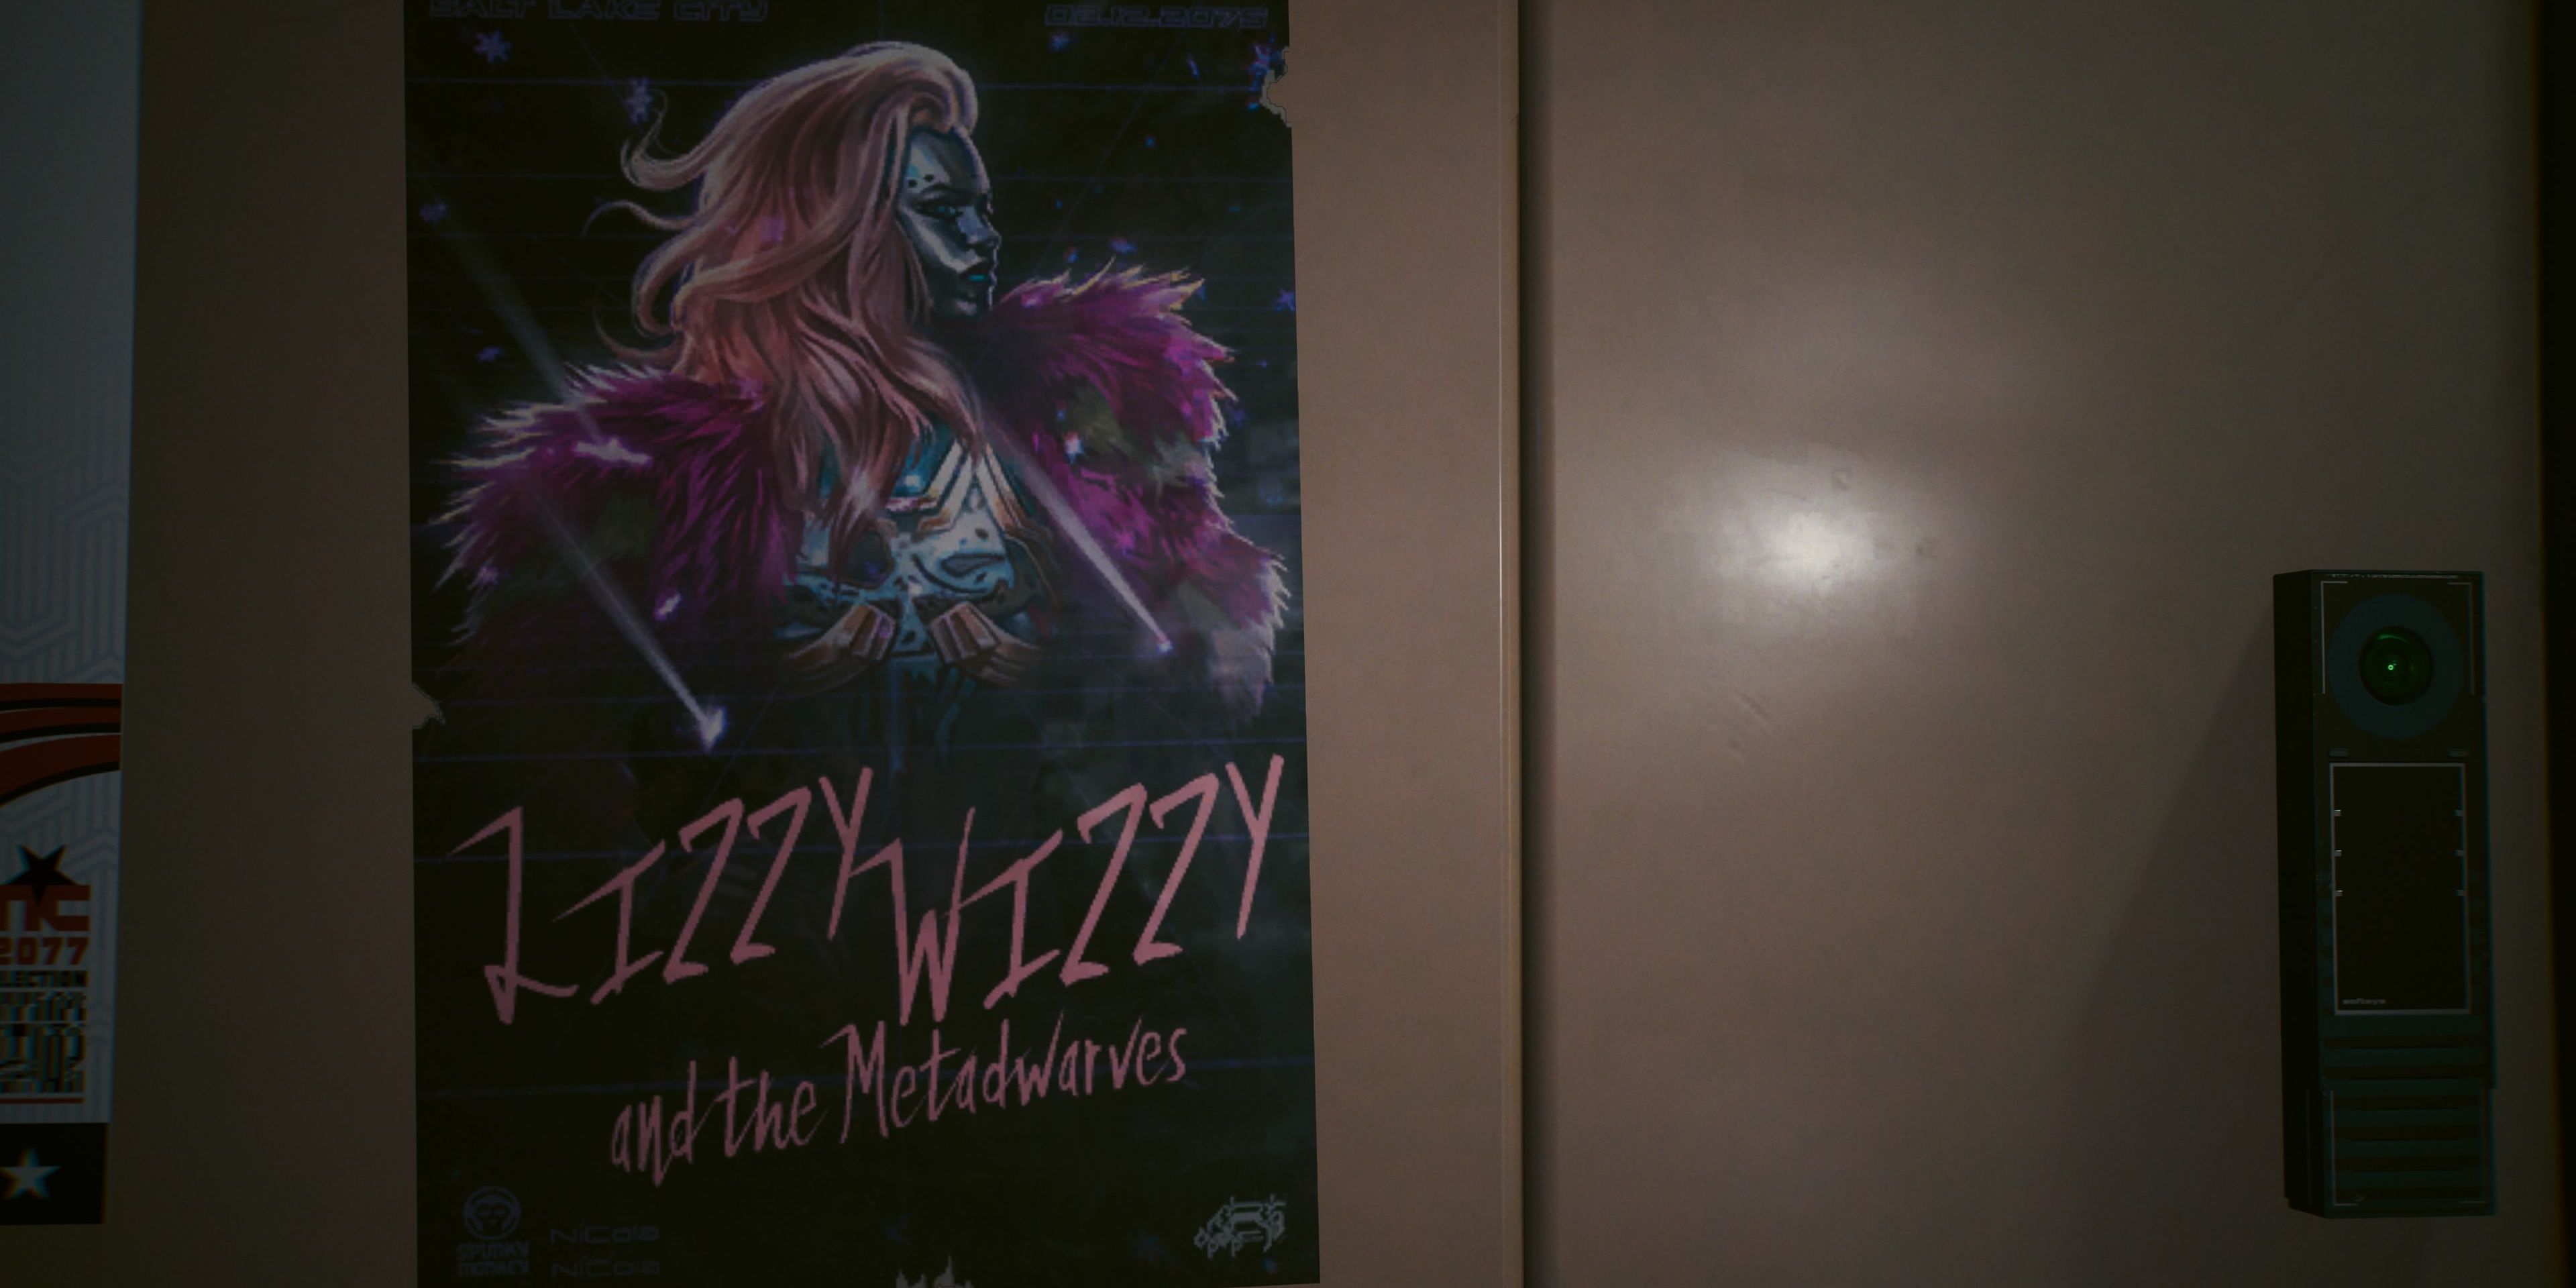 lizzy wizzy concert poster